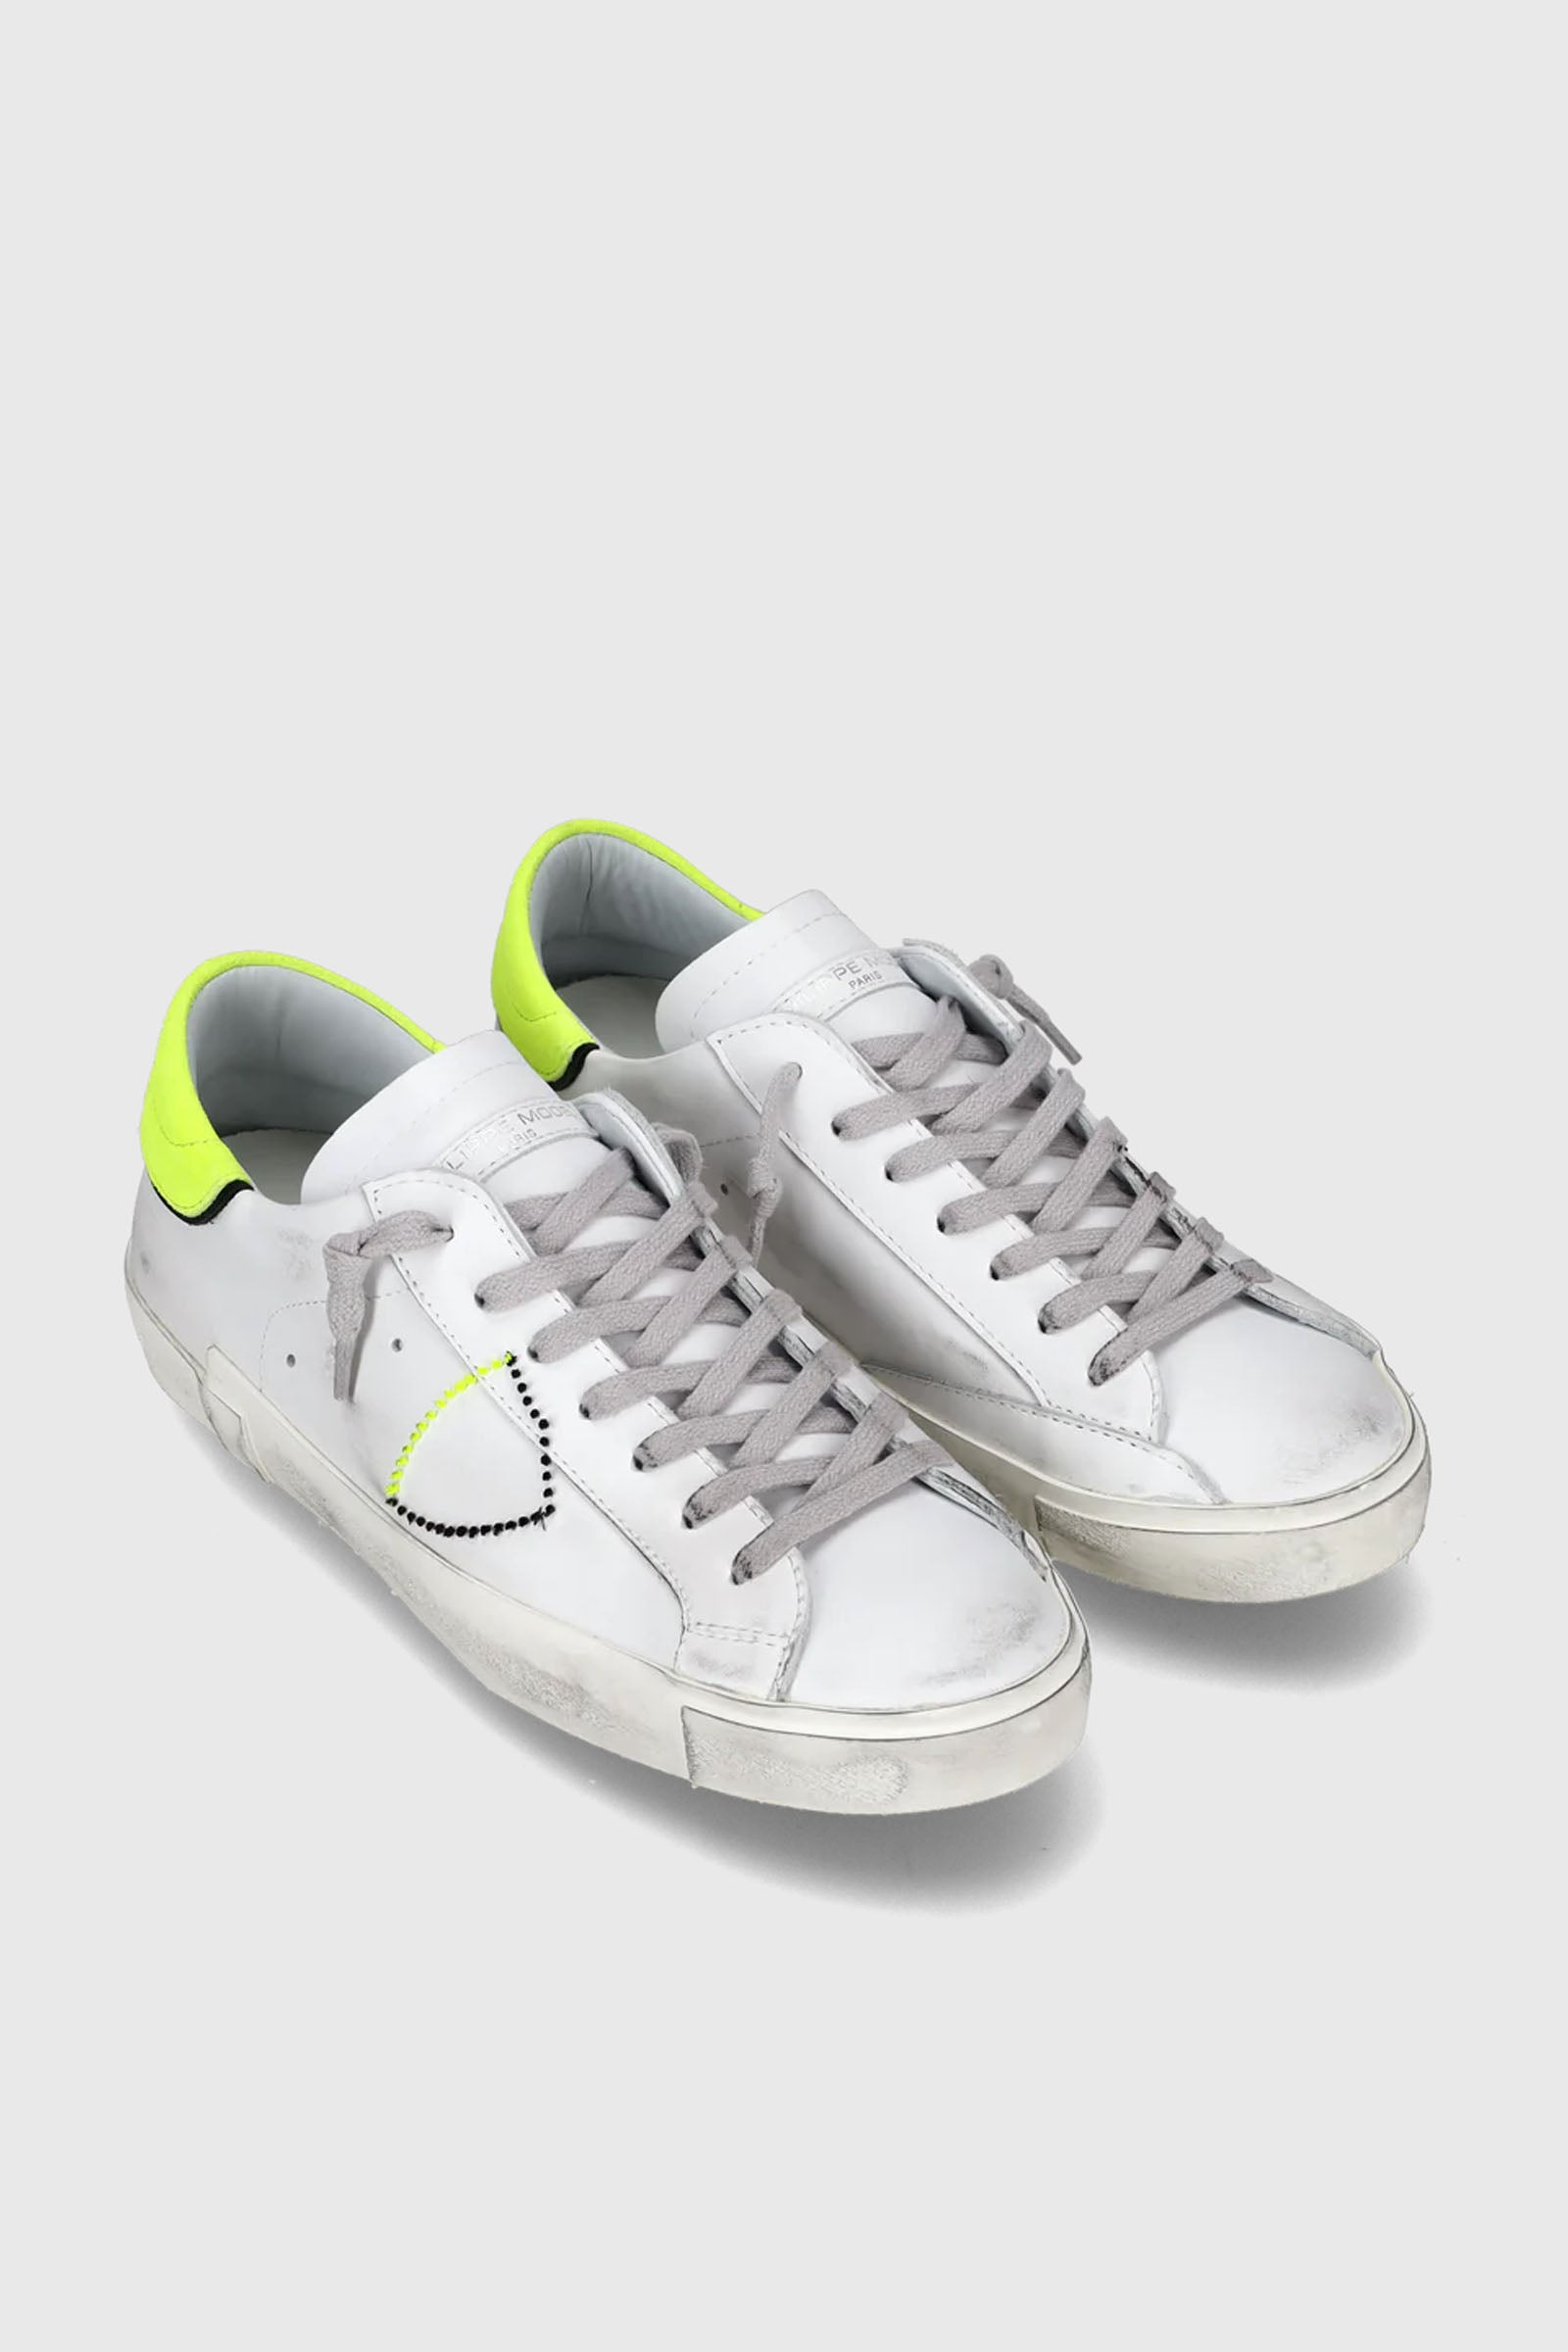 Philippe Model Sneakers PRSX Veau Broderie Leather White/Yellow Fluo - 2